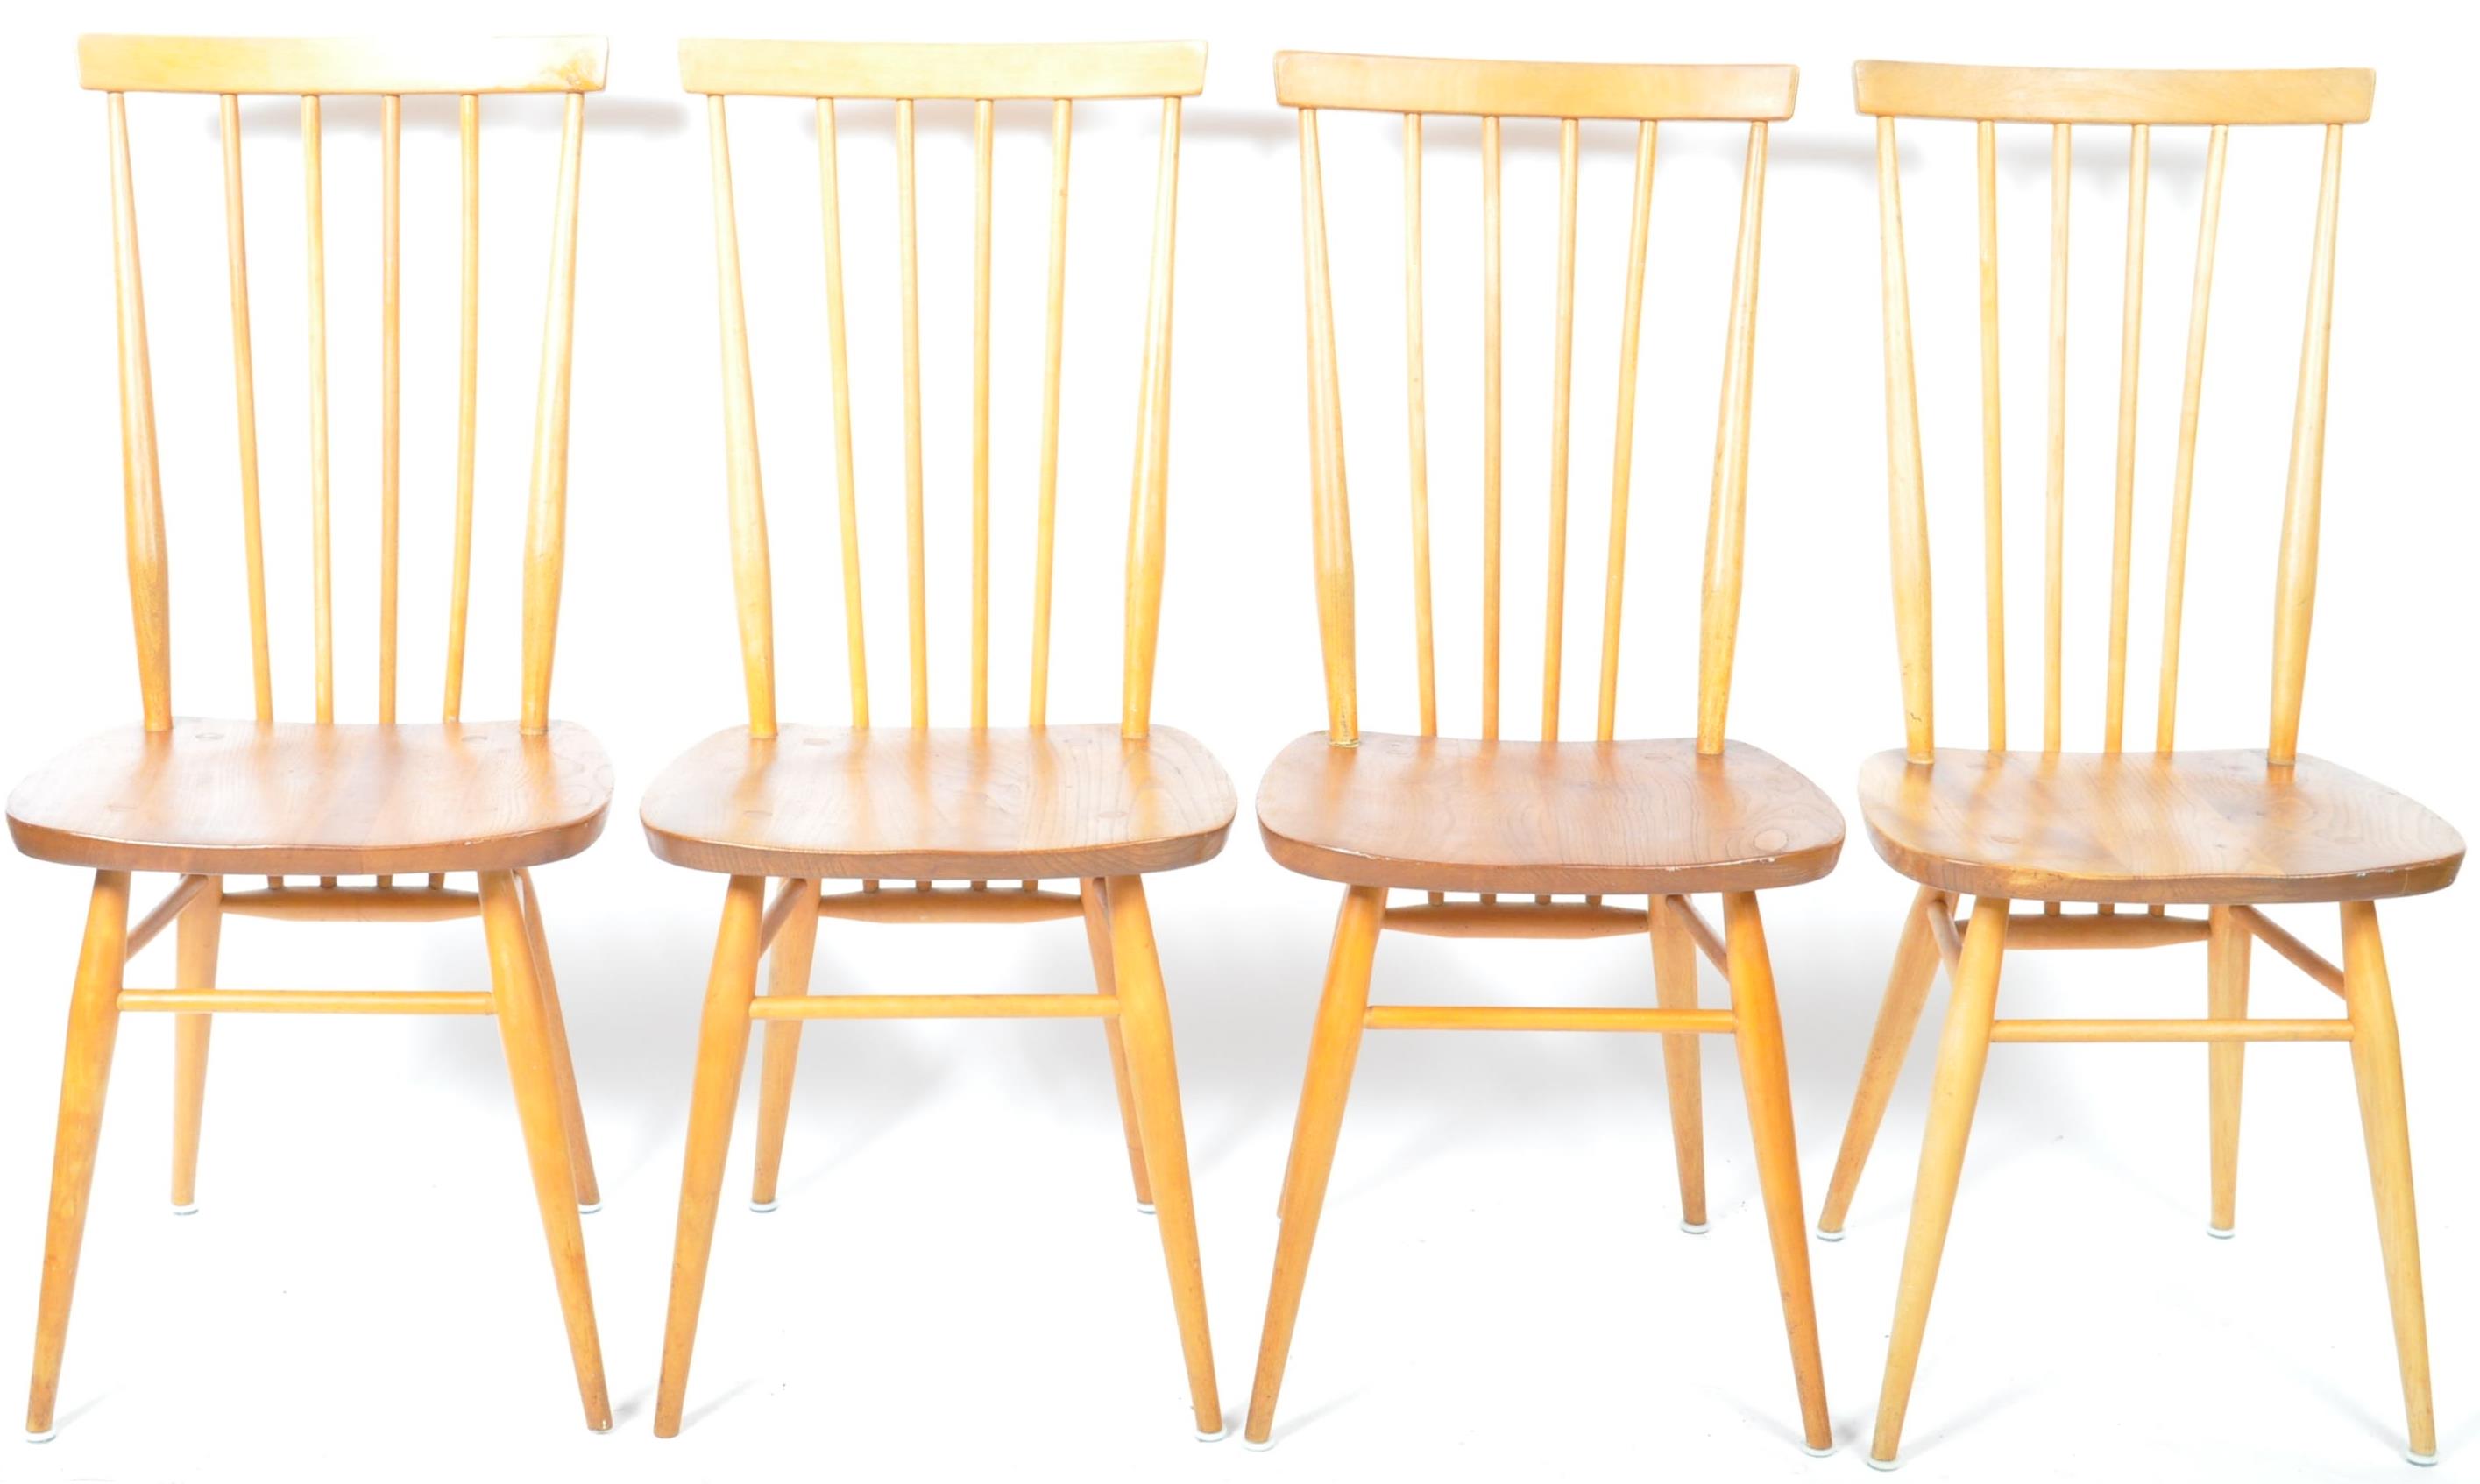 LUCIAN ERCOLANI ERCOL MODEL 608 SET OF FOUR CHAIRS - Image 2 of 6